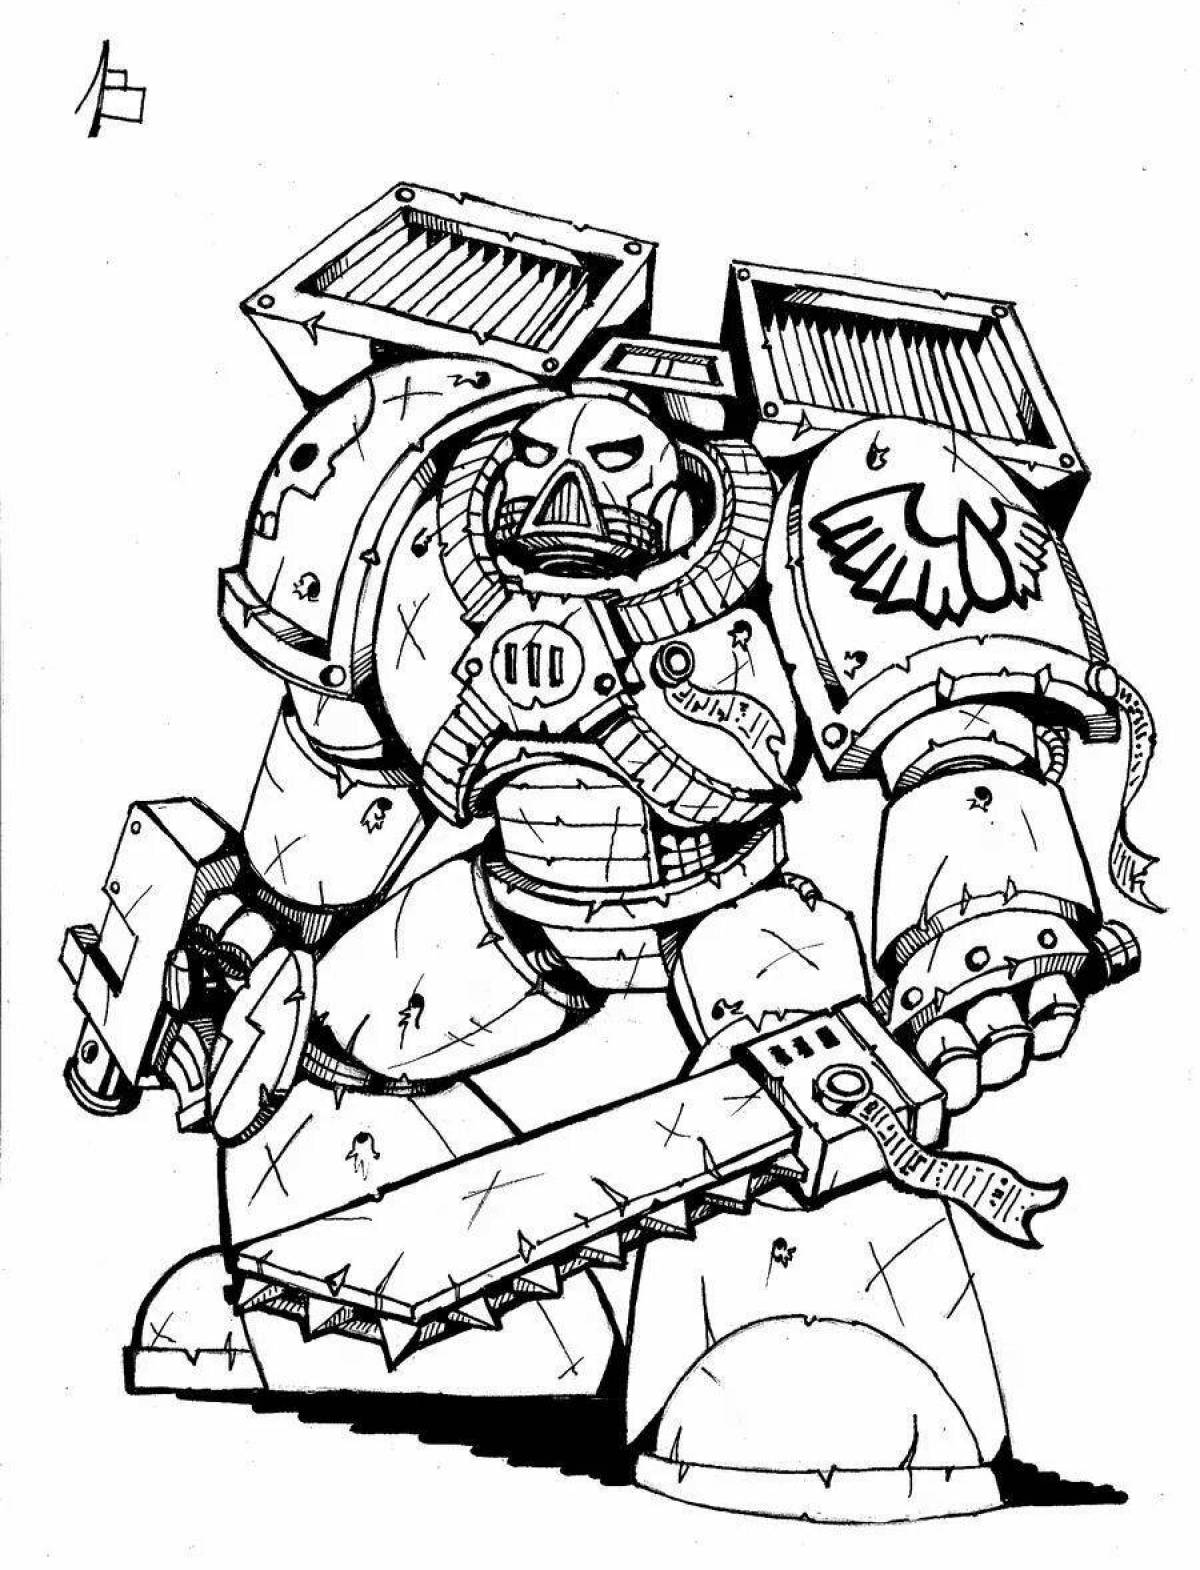 Colourfully designed warhammer coloring page